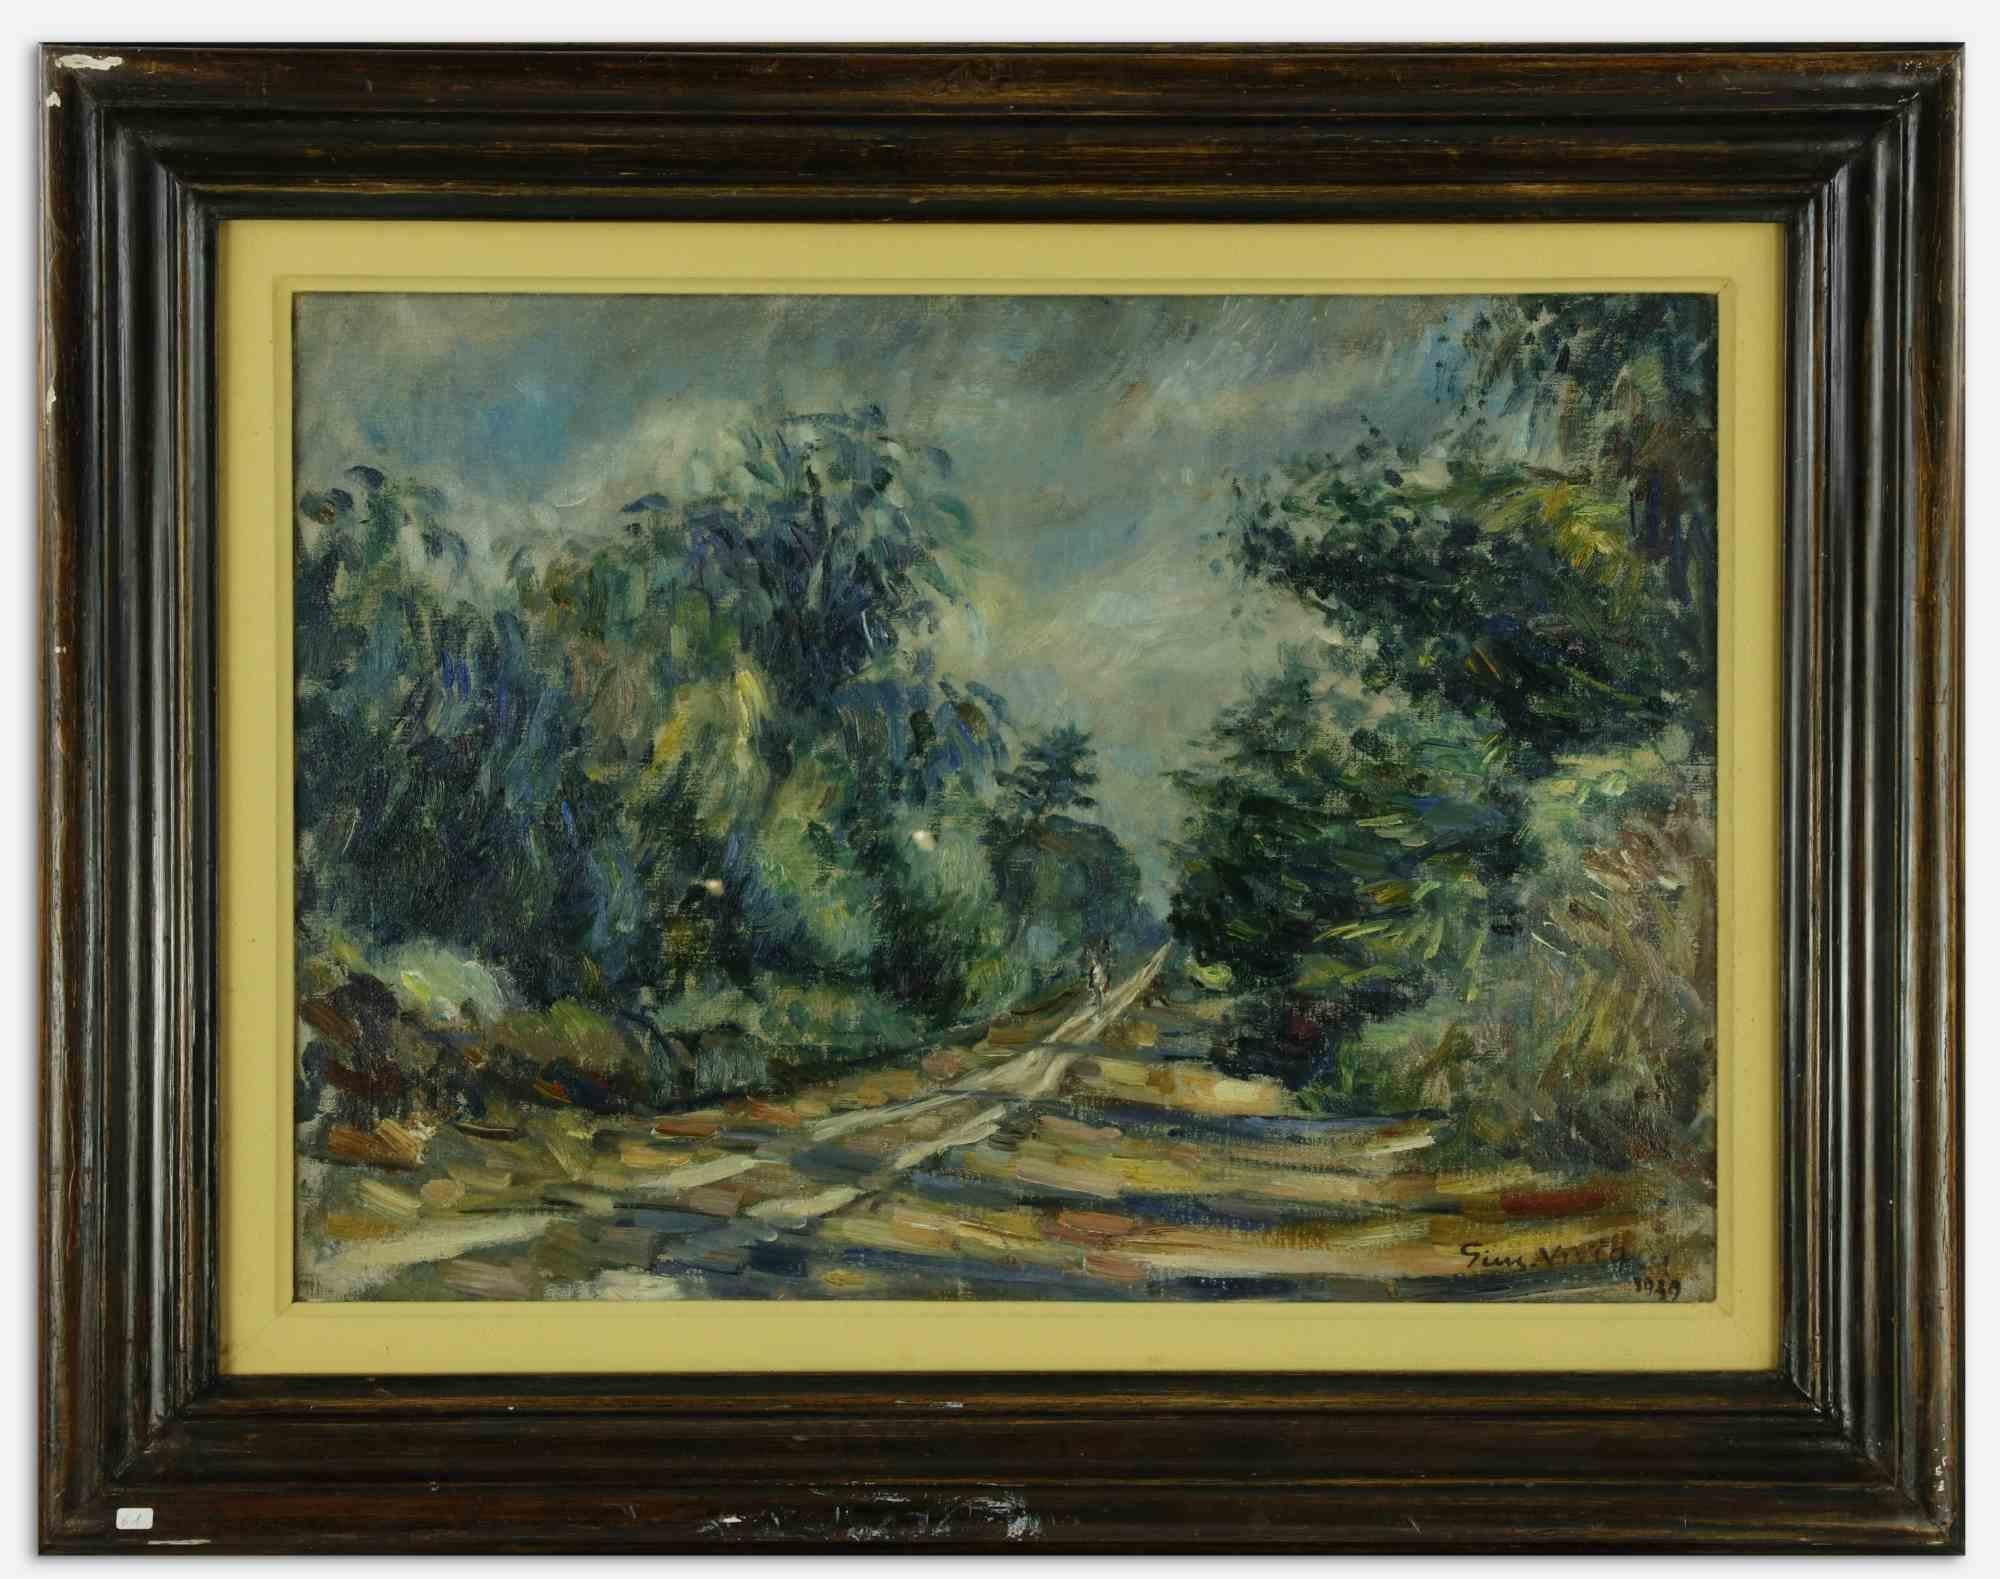 Walk in S. Rossore is an original modern artwork realized in 1929 by Giuseppe Viviani.

Mixed colored oil on canvas.

Hand signed and dated in the bottom right:"Gius. Viviani 1929".

Published in the general catalogue “Viviani Catalogo delle Opere”,